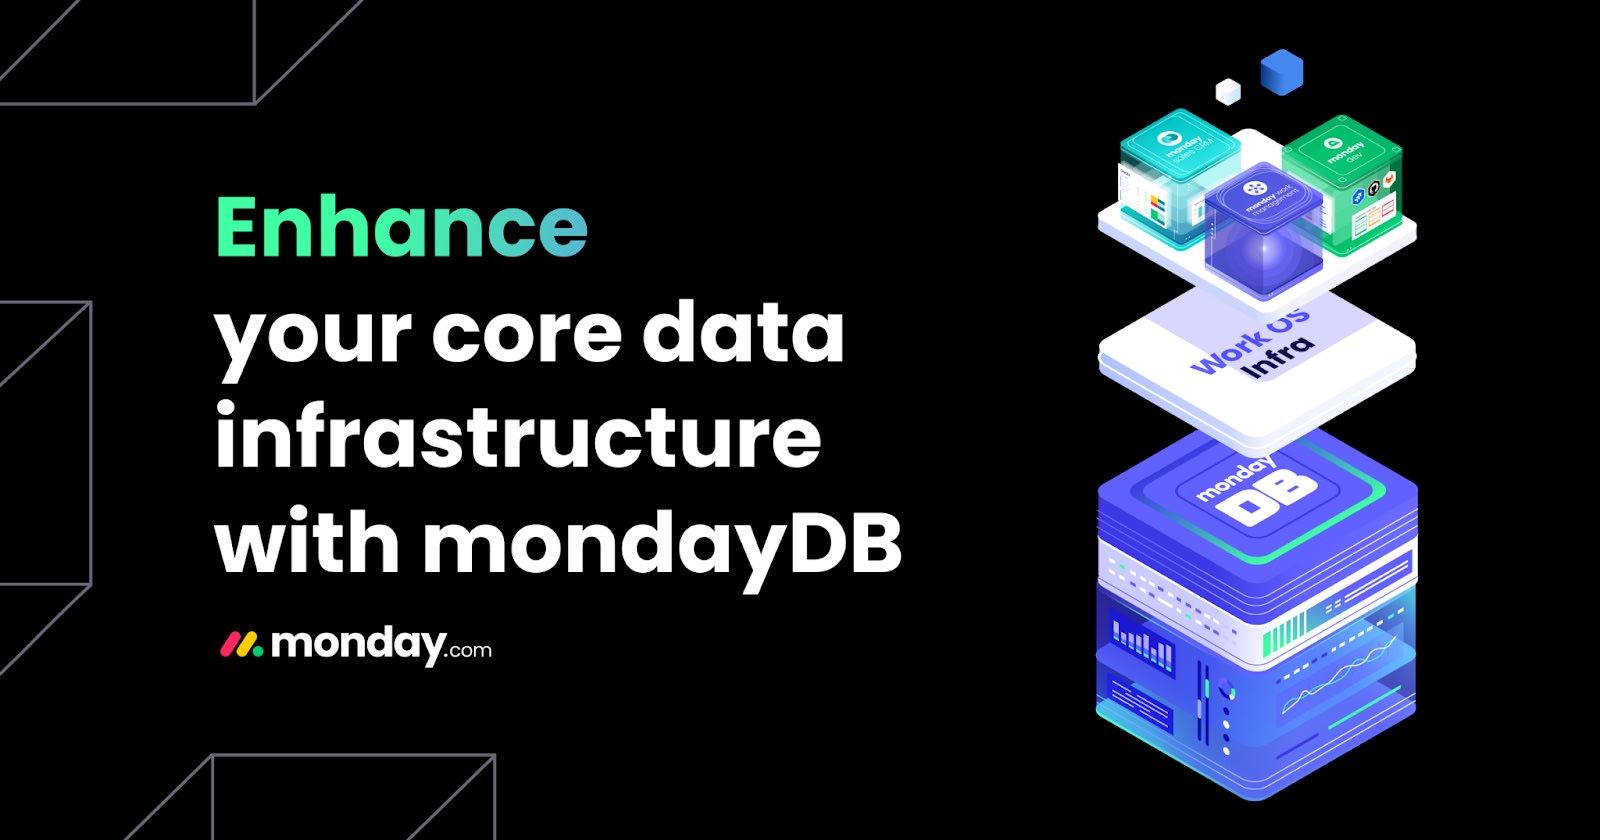 Introducing mondayDB 10 8211 Infrastructure Built for Performance Scale and Flexibility